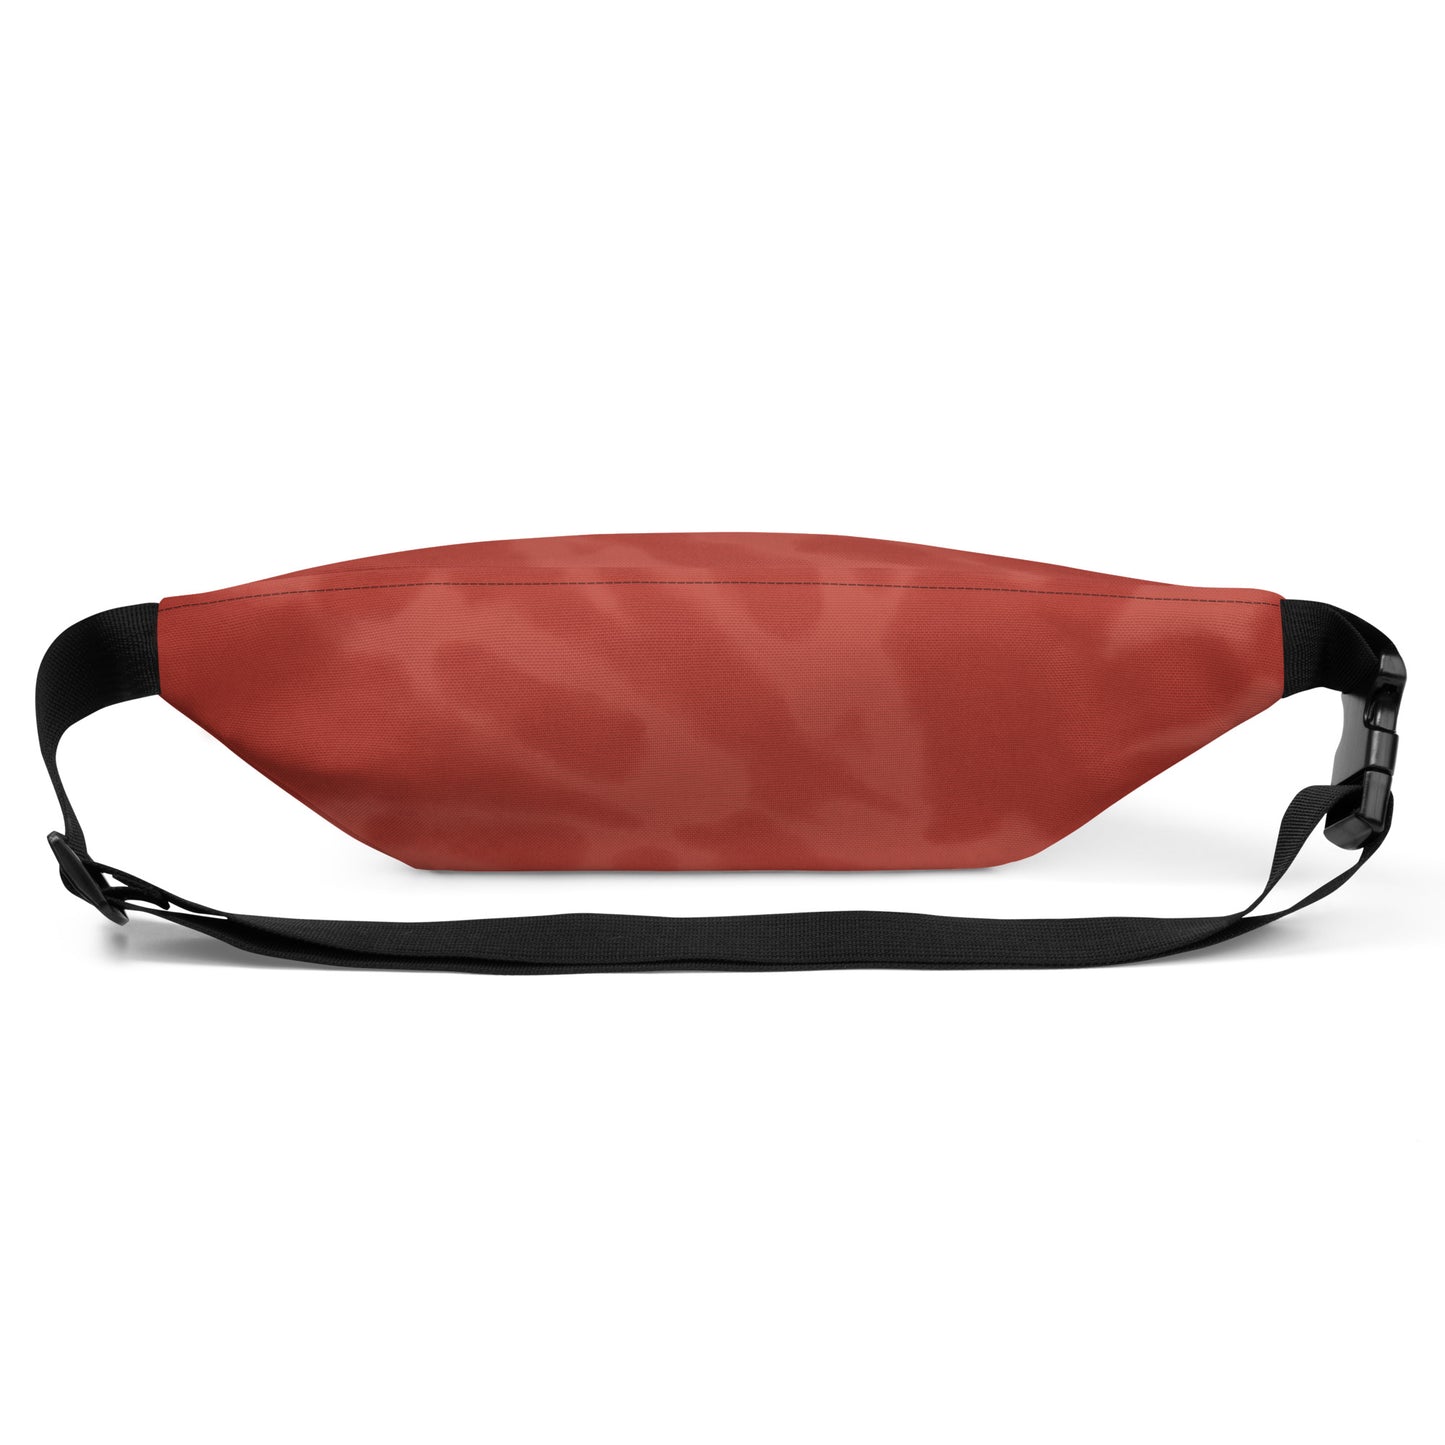 Travel Gift Fanny Pack - Red Tie-Dye • EZE Buenos Aires • YHM Designs - Image 09